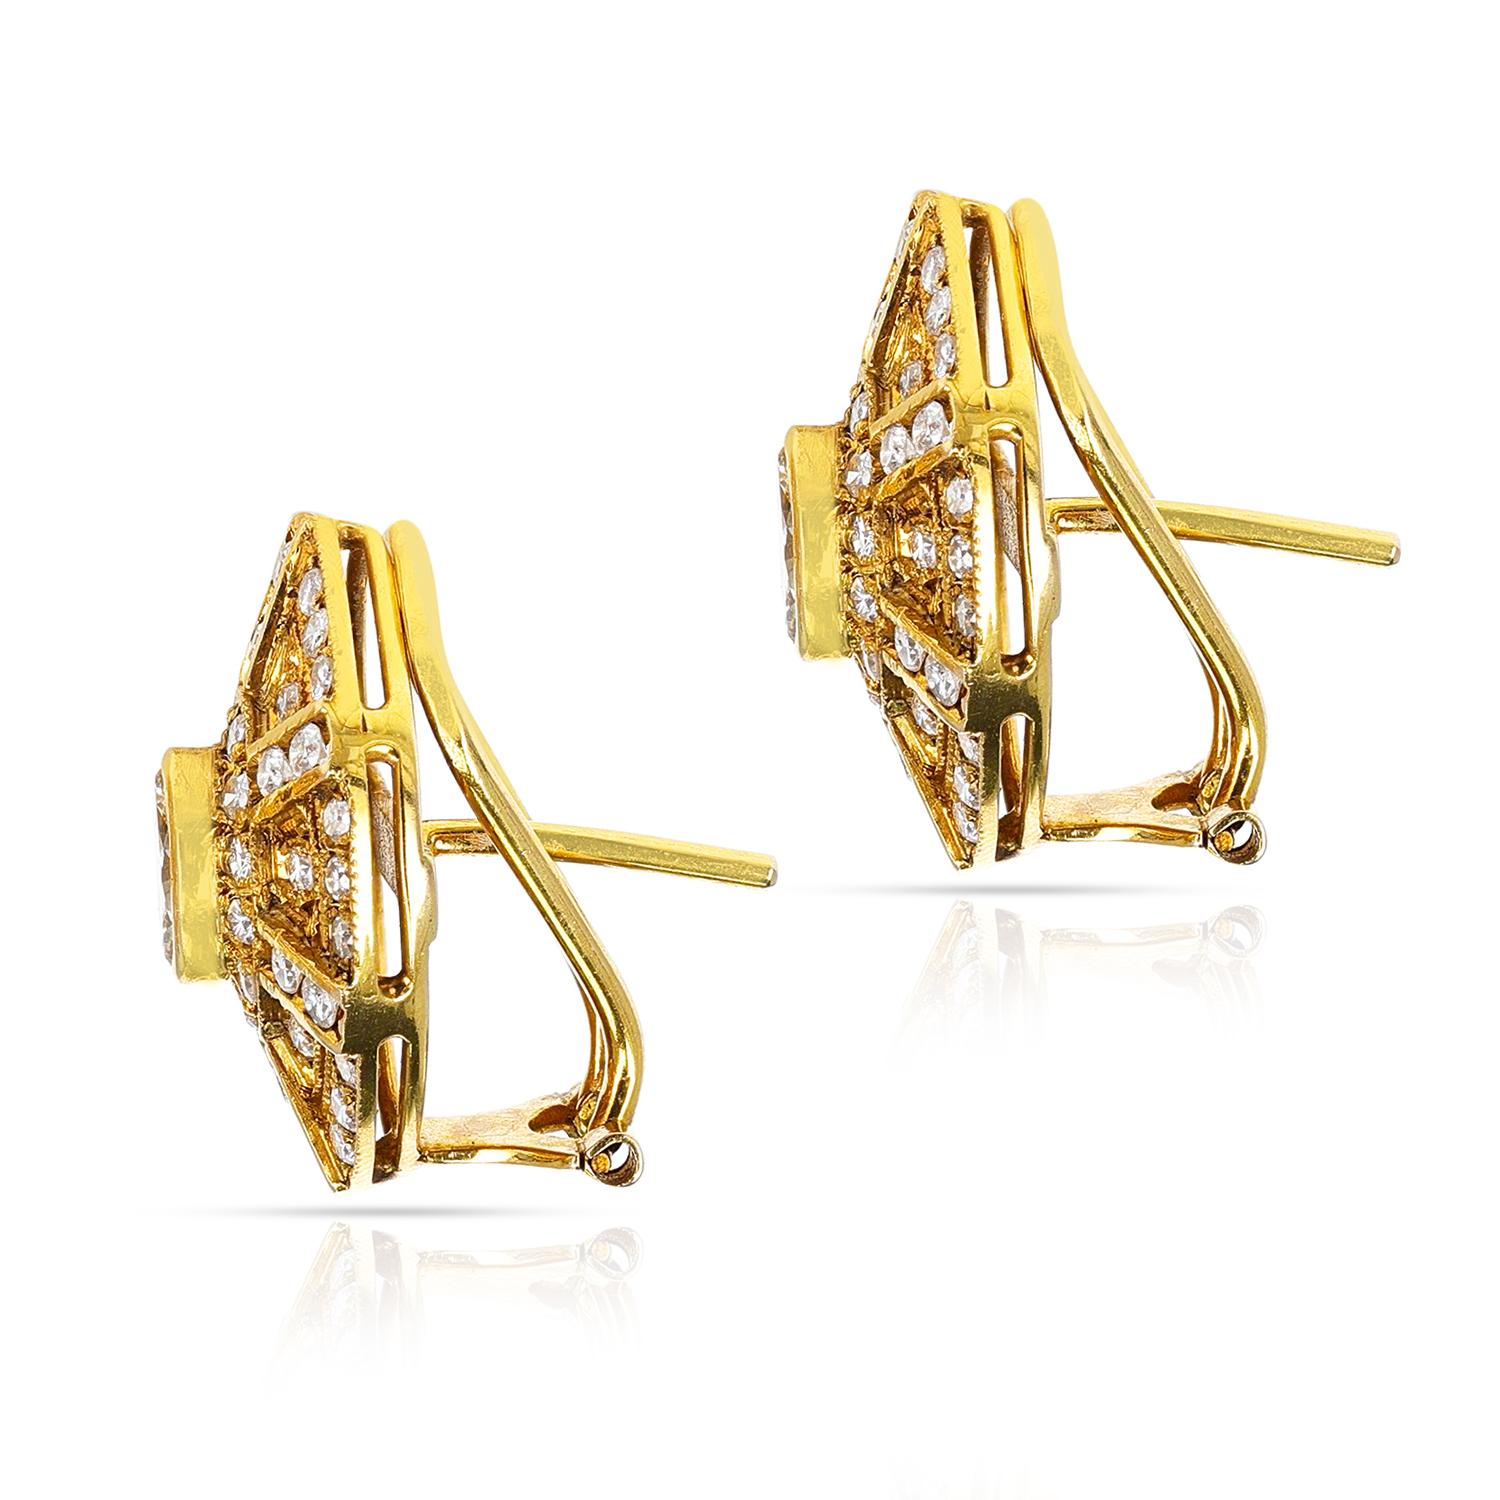 Marquise Cut Curved Diamond and Yellow Gold Earrings, 18 Karat, Part of Earring Set